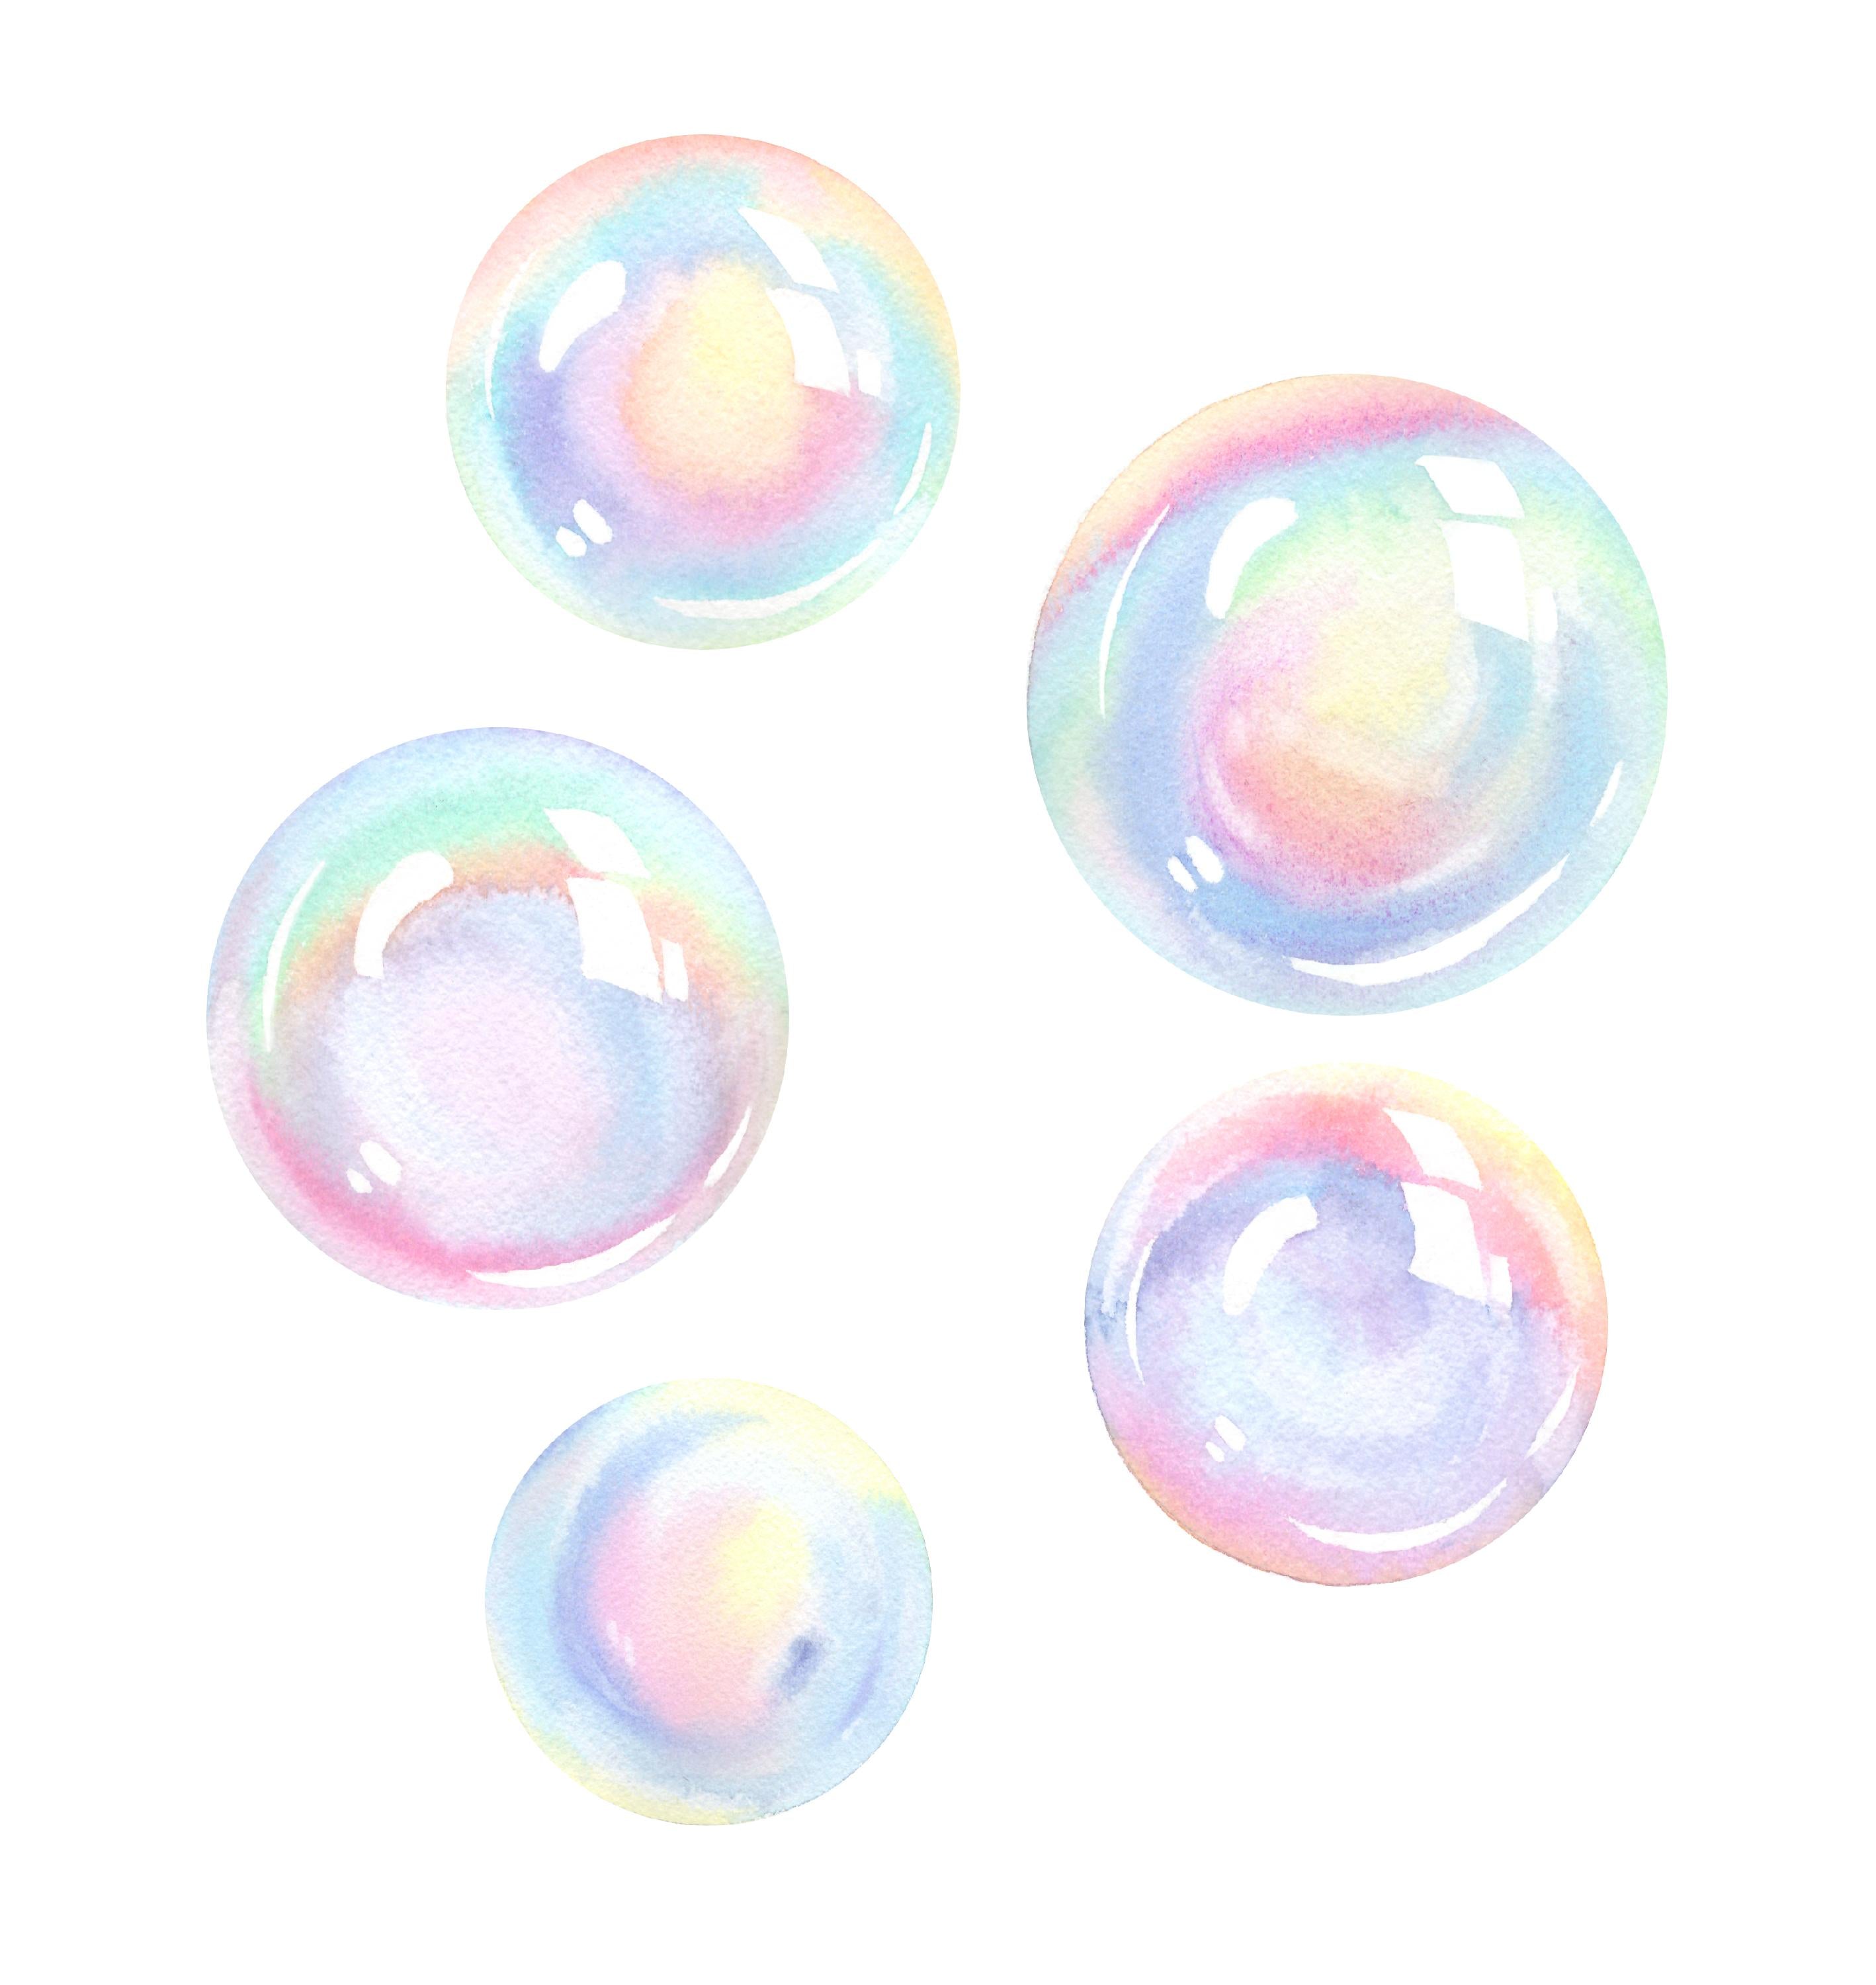 Watercolor Rainbow Bubbles Wall Decal Set Bubbles Wall Stickers Wall Art Nursery Decor Removable Fabric Vinyl Wall Stickers SIZE LARGE | DecalBaby